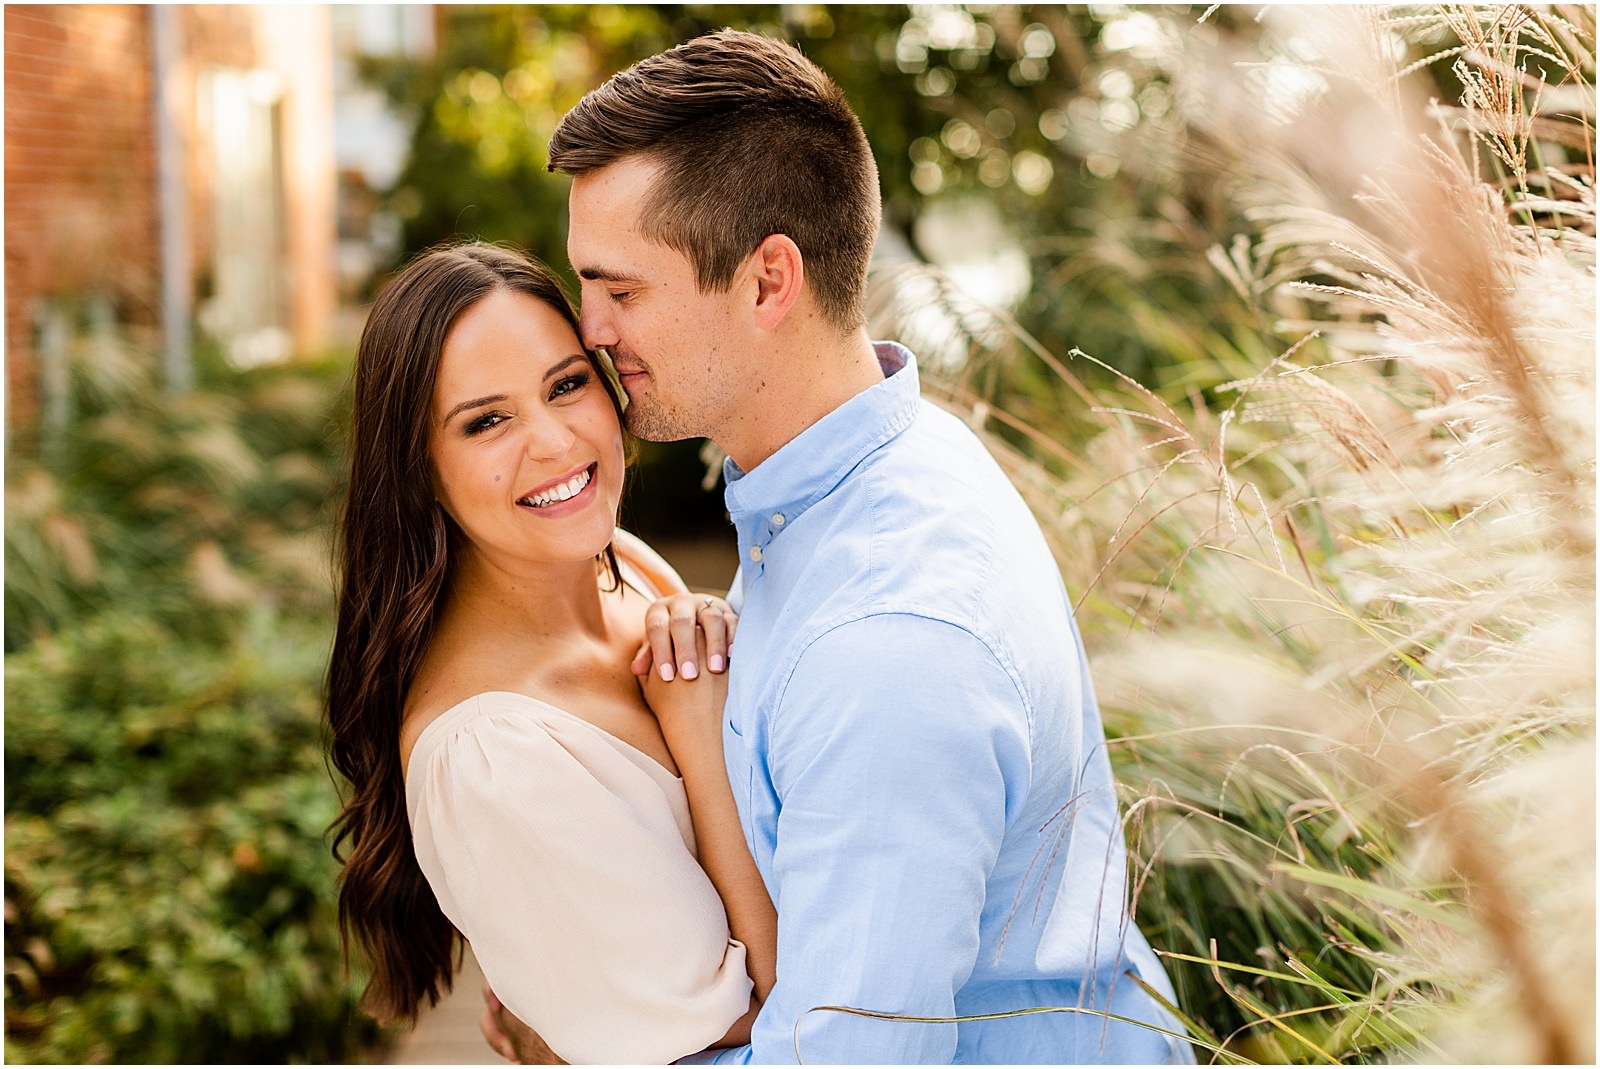 Emma and Jace's Downtown Newburgh Engagement Session | Bret and Brandie Photography | Evansville Indiana Wedding Photographers_0031.jpg